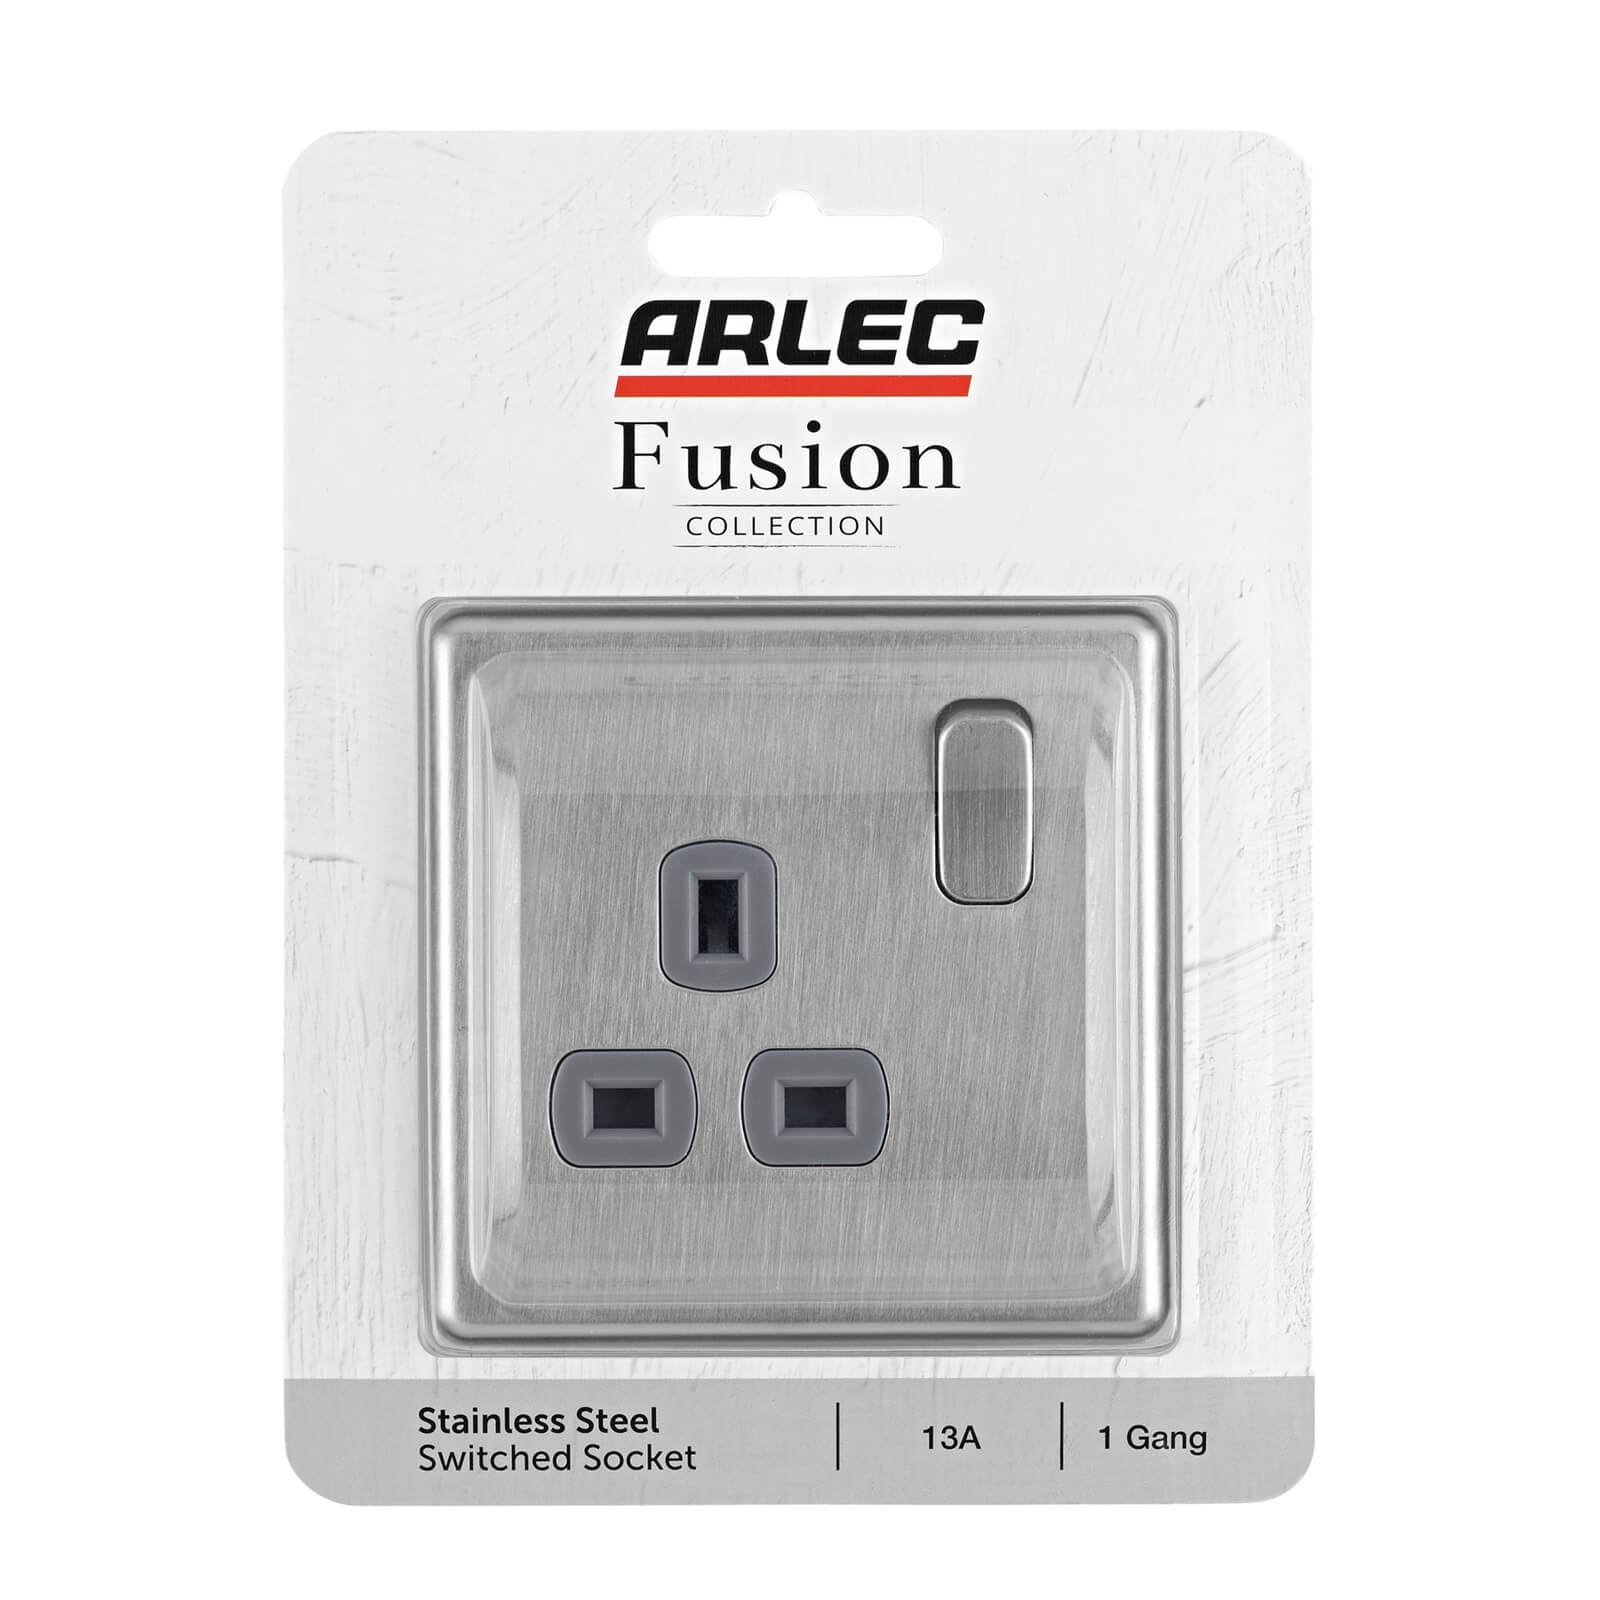 Arlec Fusion 13A 1 Gang Stainless Steel Single switched socket